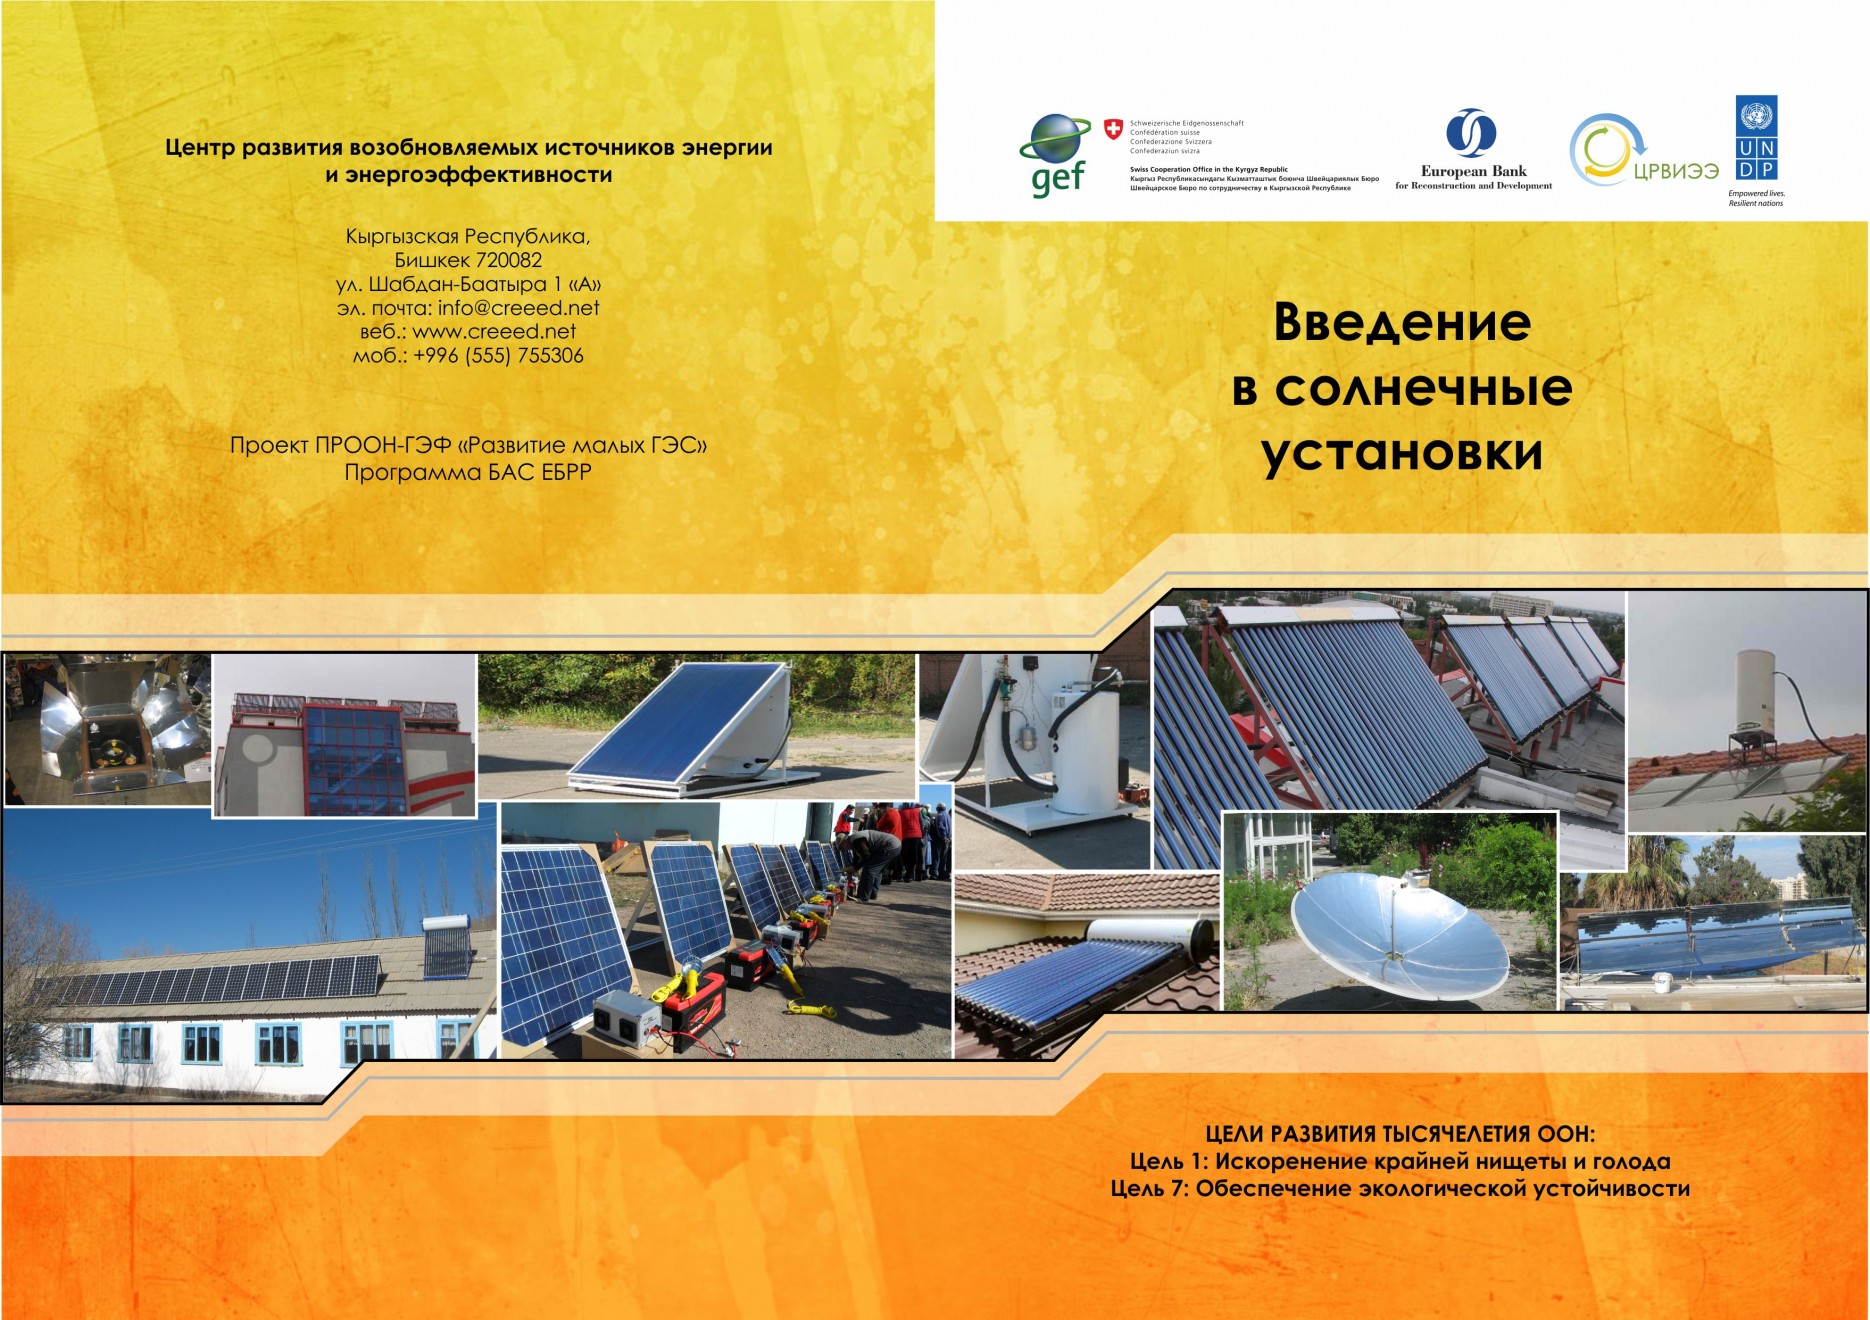 CREEED has prepared broshures and manuals on renewable technologies